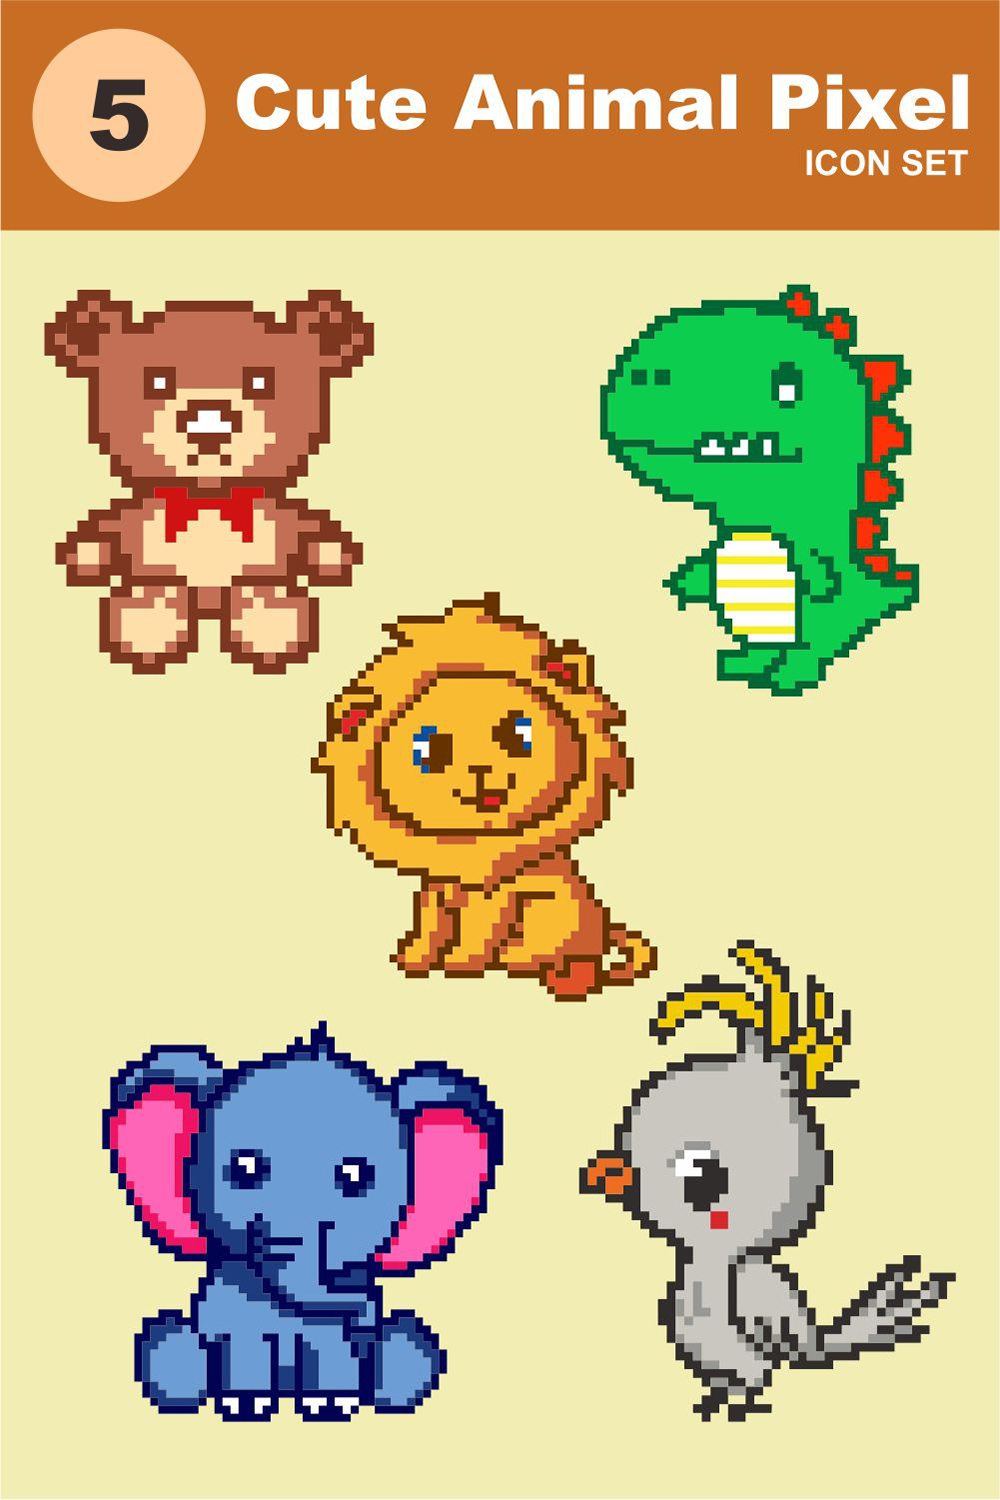 5 cute animal pixel - only $ 10 pinterest preview image.